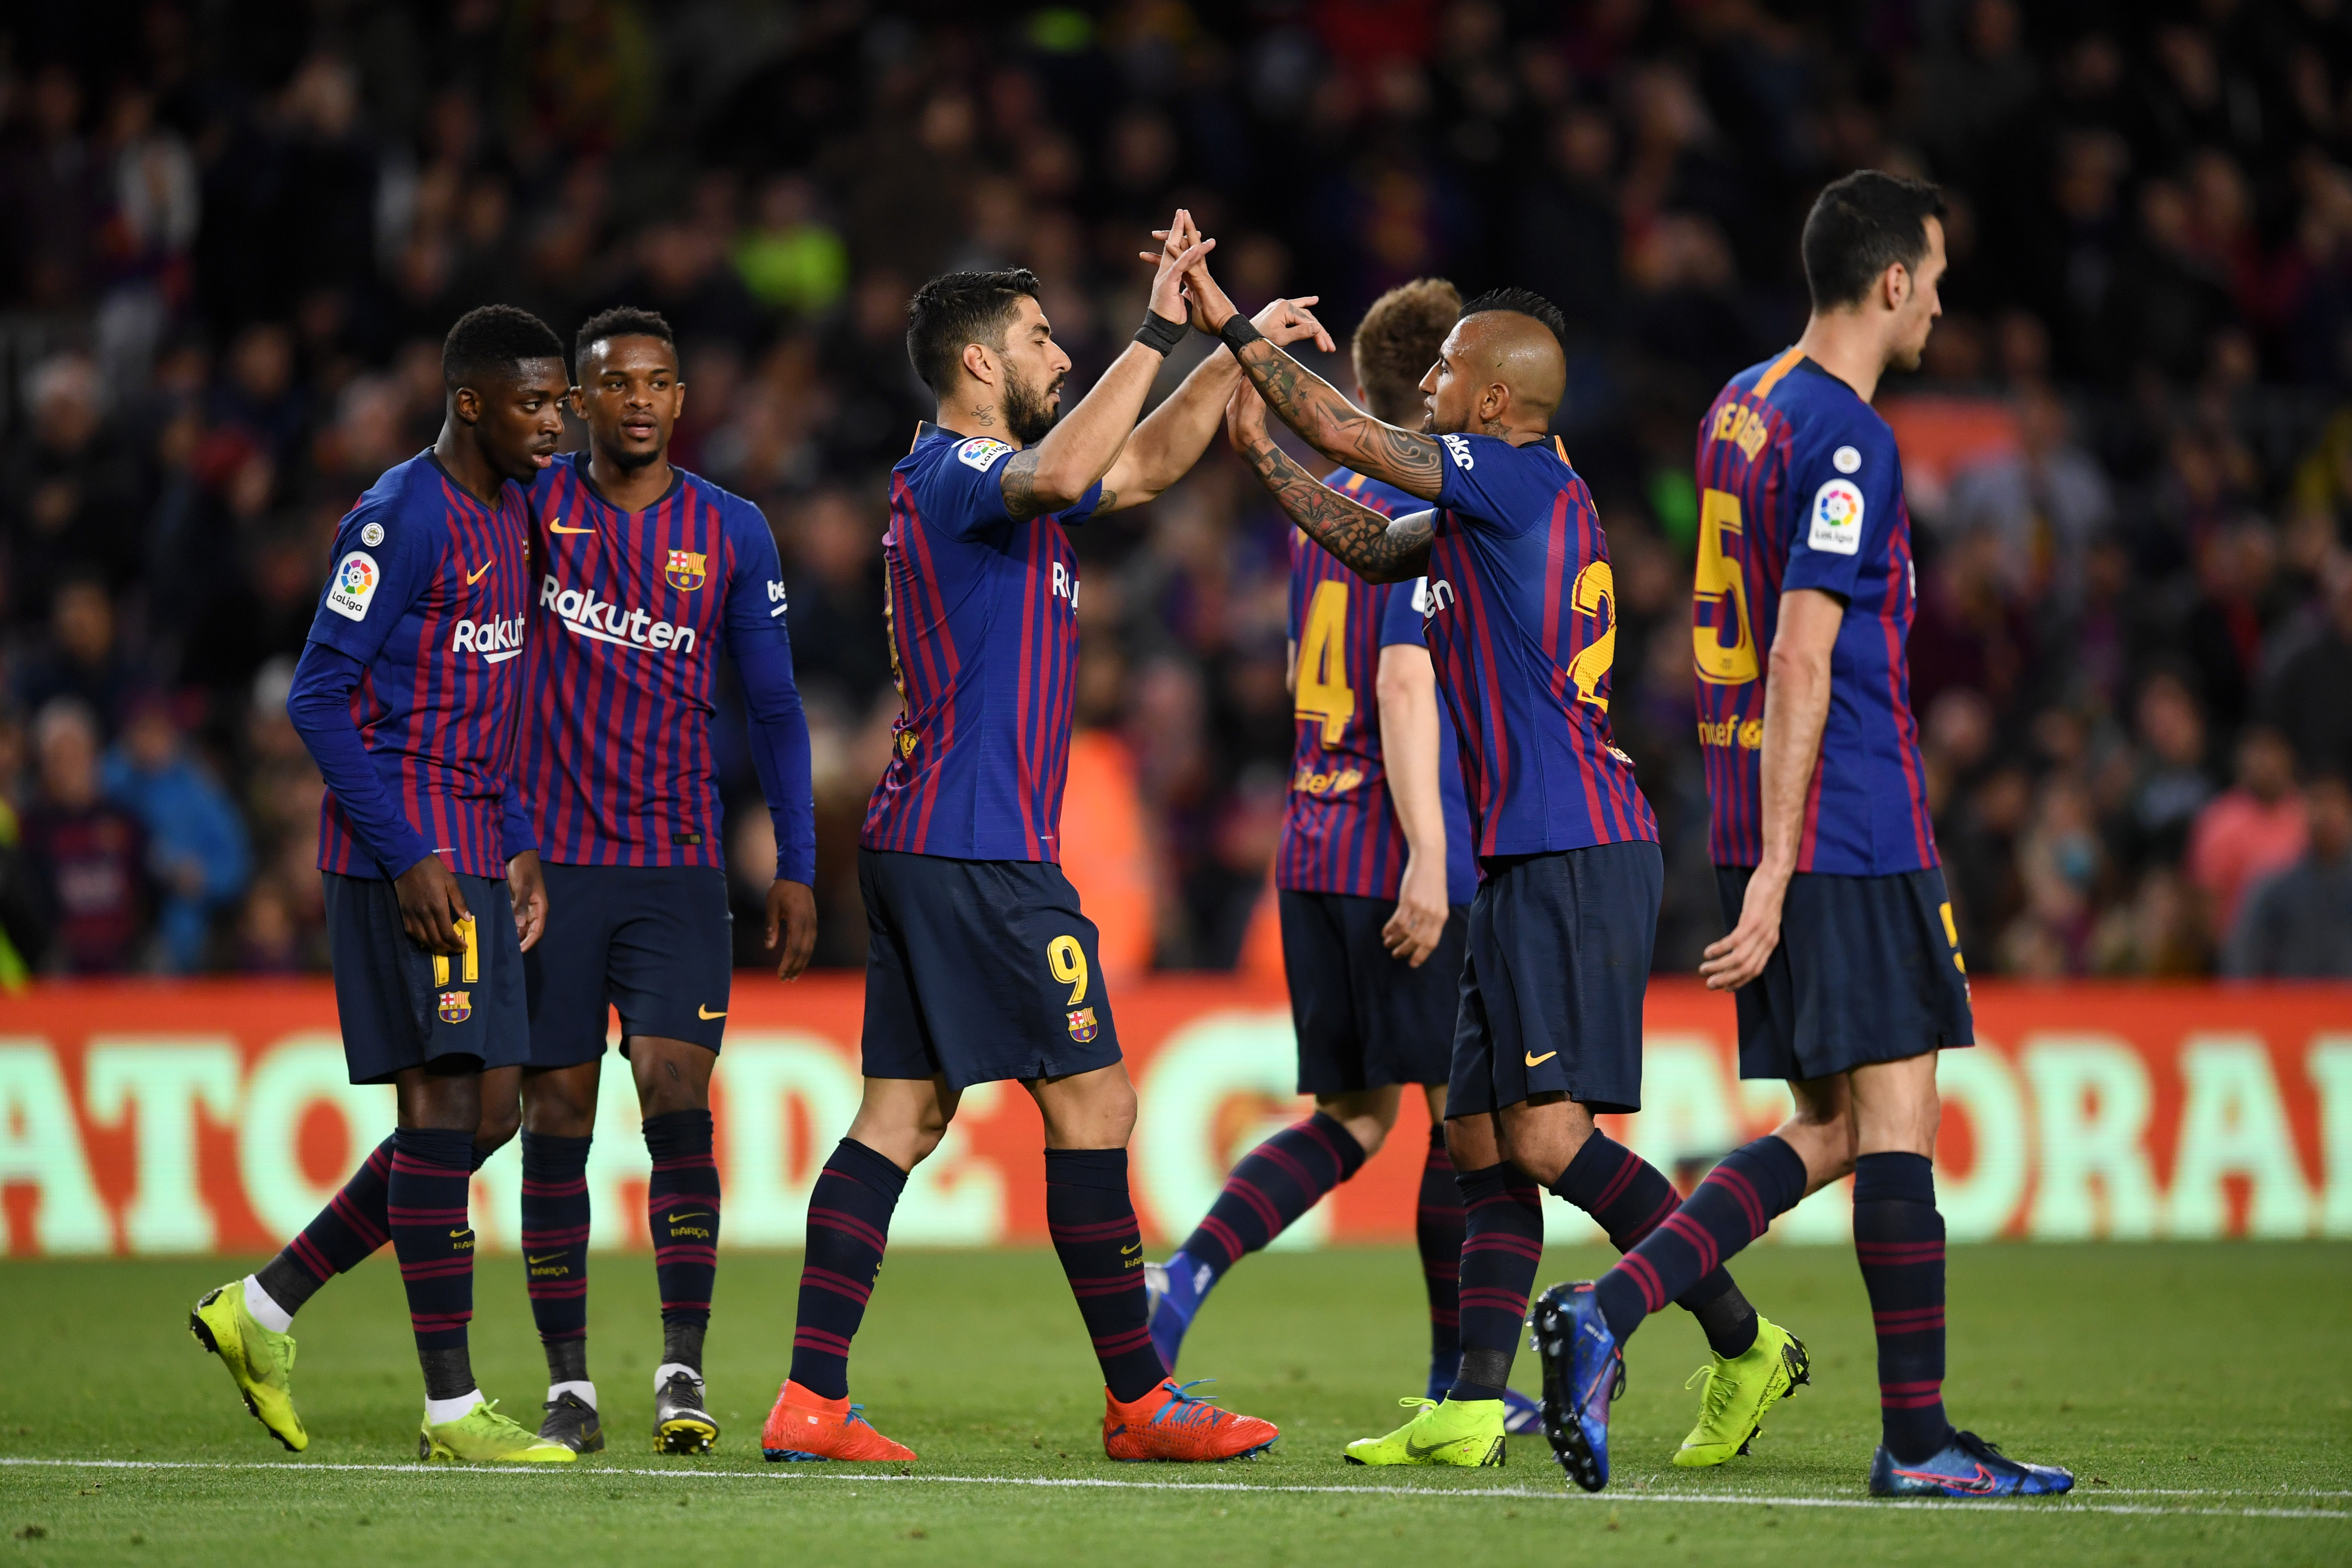 BARCELONA, SPAIN - MARCH 09: Luis Suarez of Barcelona celebrates with teammate Arturo Vidal after scoring his team's third goal during the La Liga match between FC Barcelona and Rayo Vallecano de Madrid at Camp Nou on March 09, 2019 in Barcelona, Spain. (Photo by David Ramos/Getty Images)